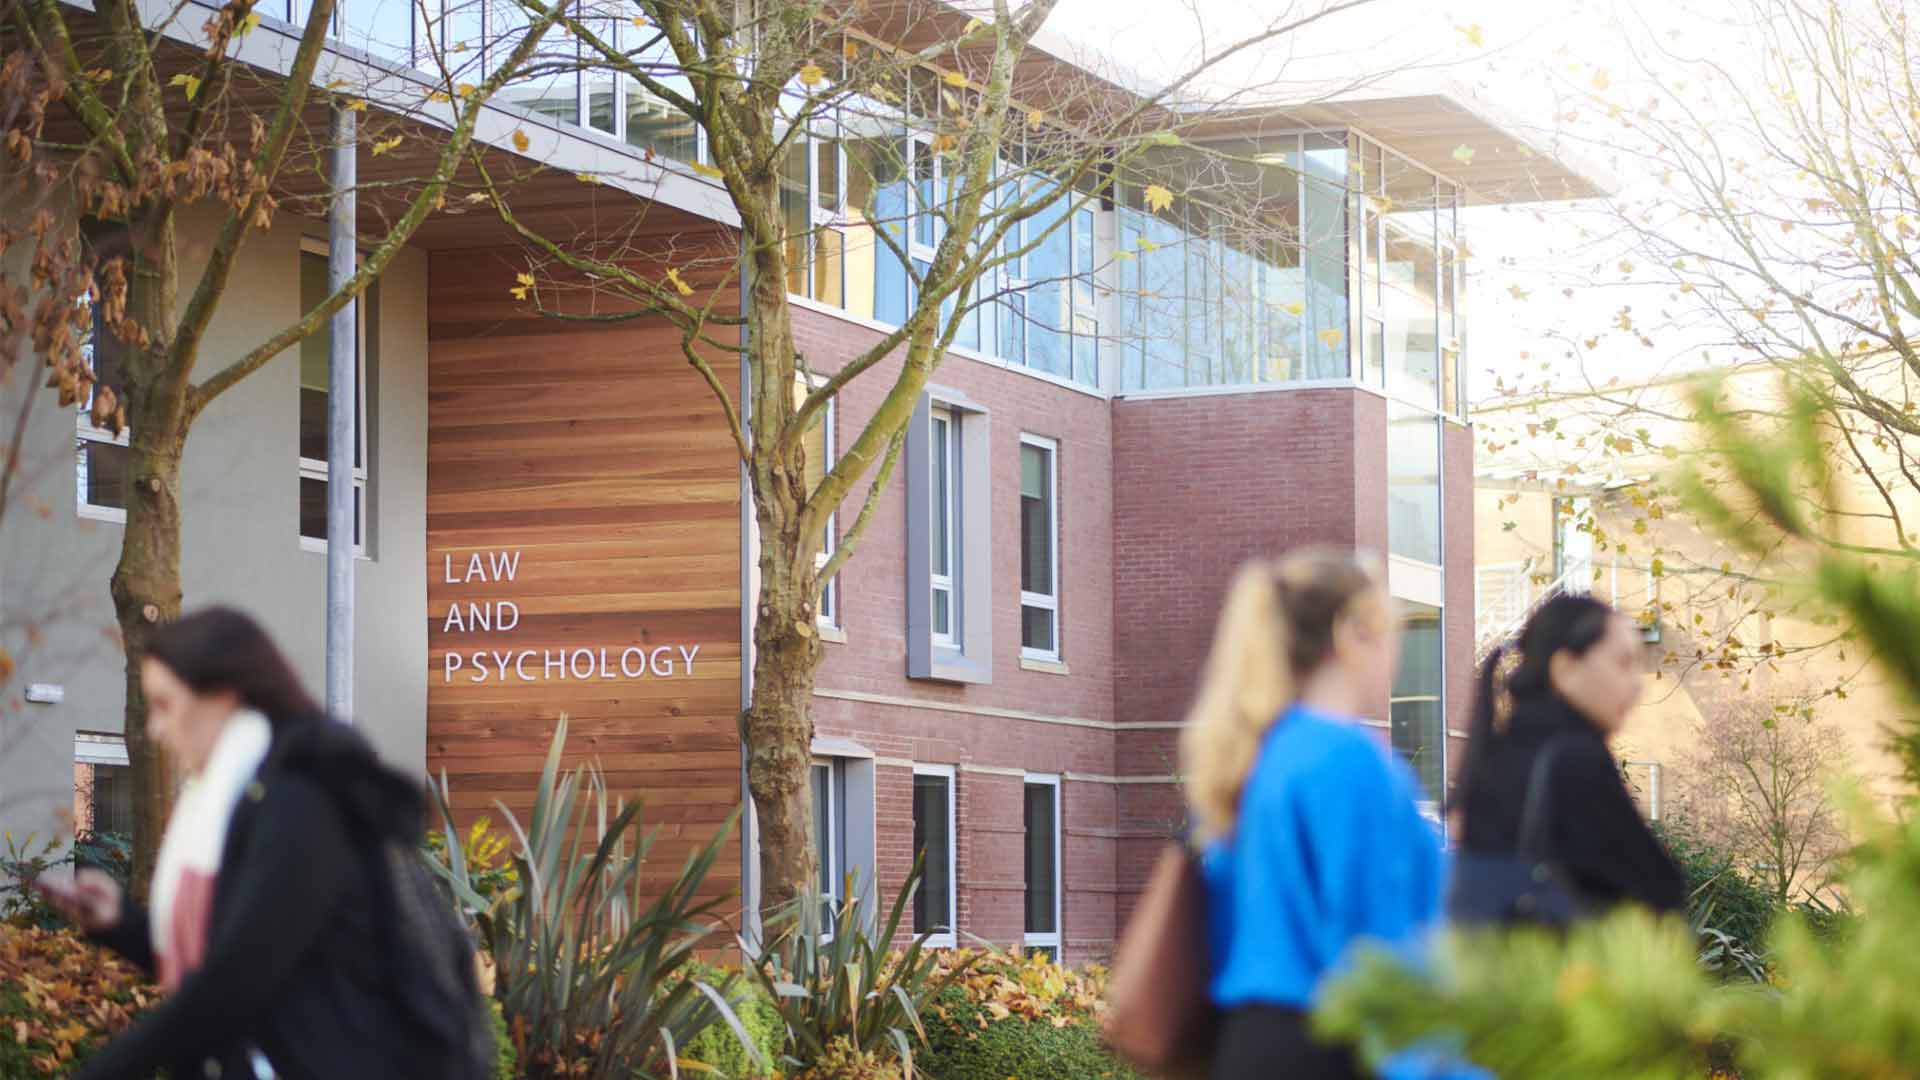 Edge Hill students on campus walking past the Law and Psychology building.